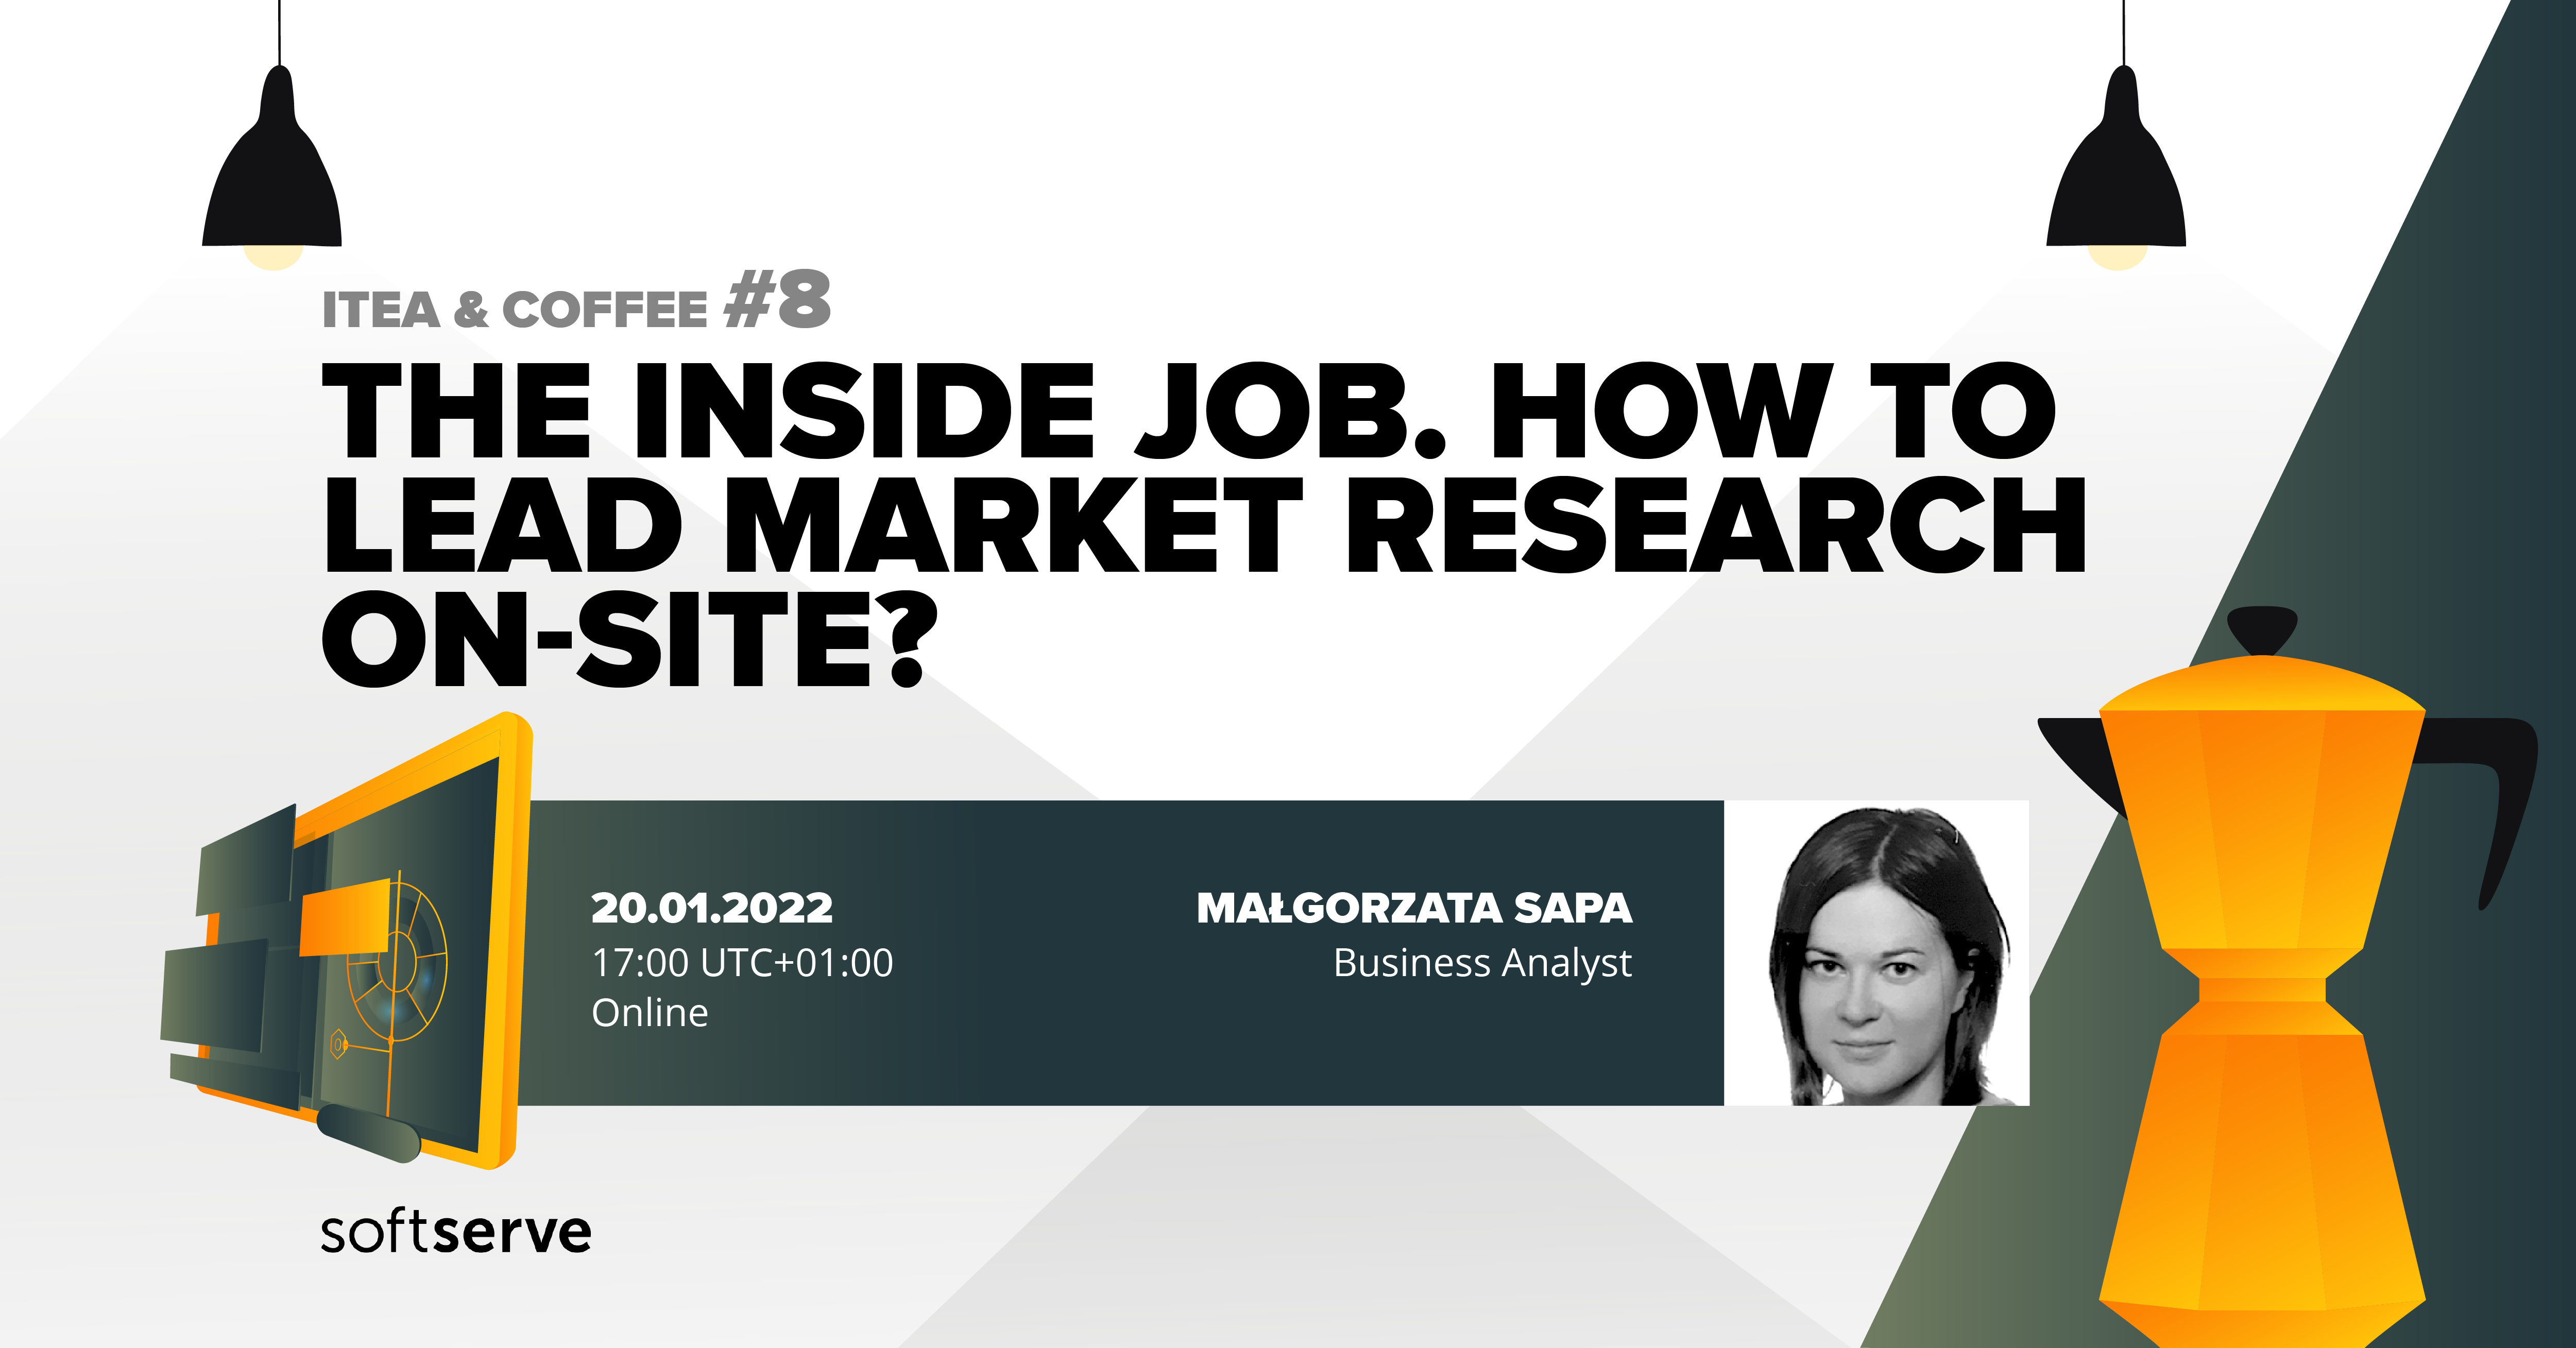 itea-coffee-8-the-inside-job-how-to-lead-market-research-on-site